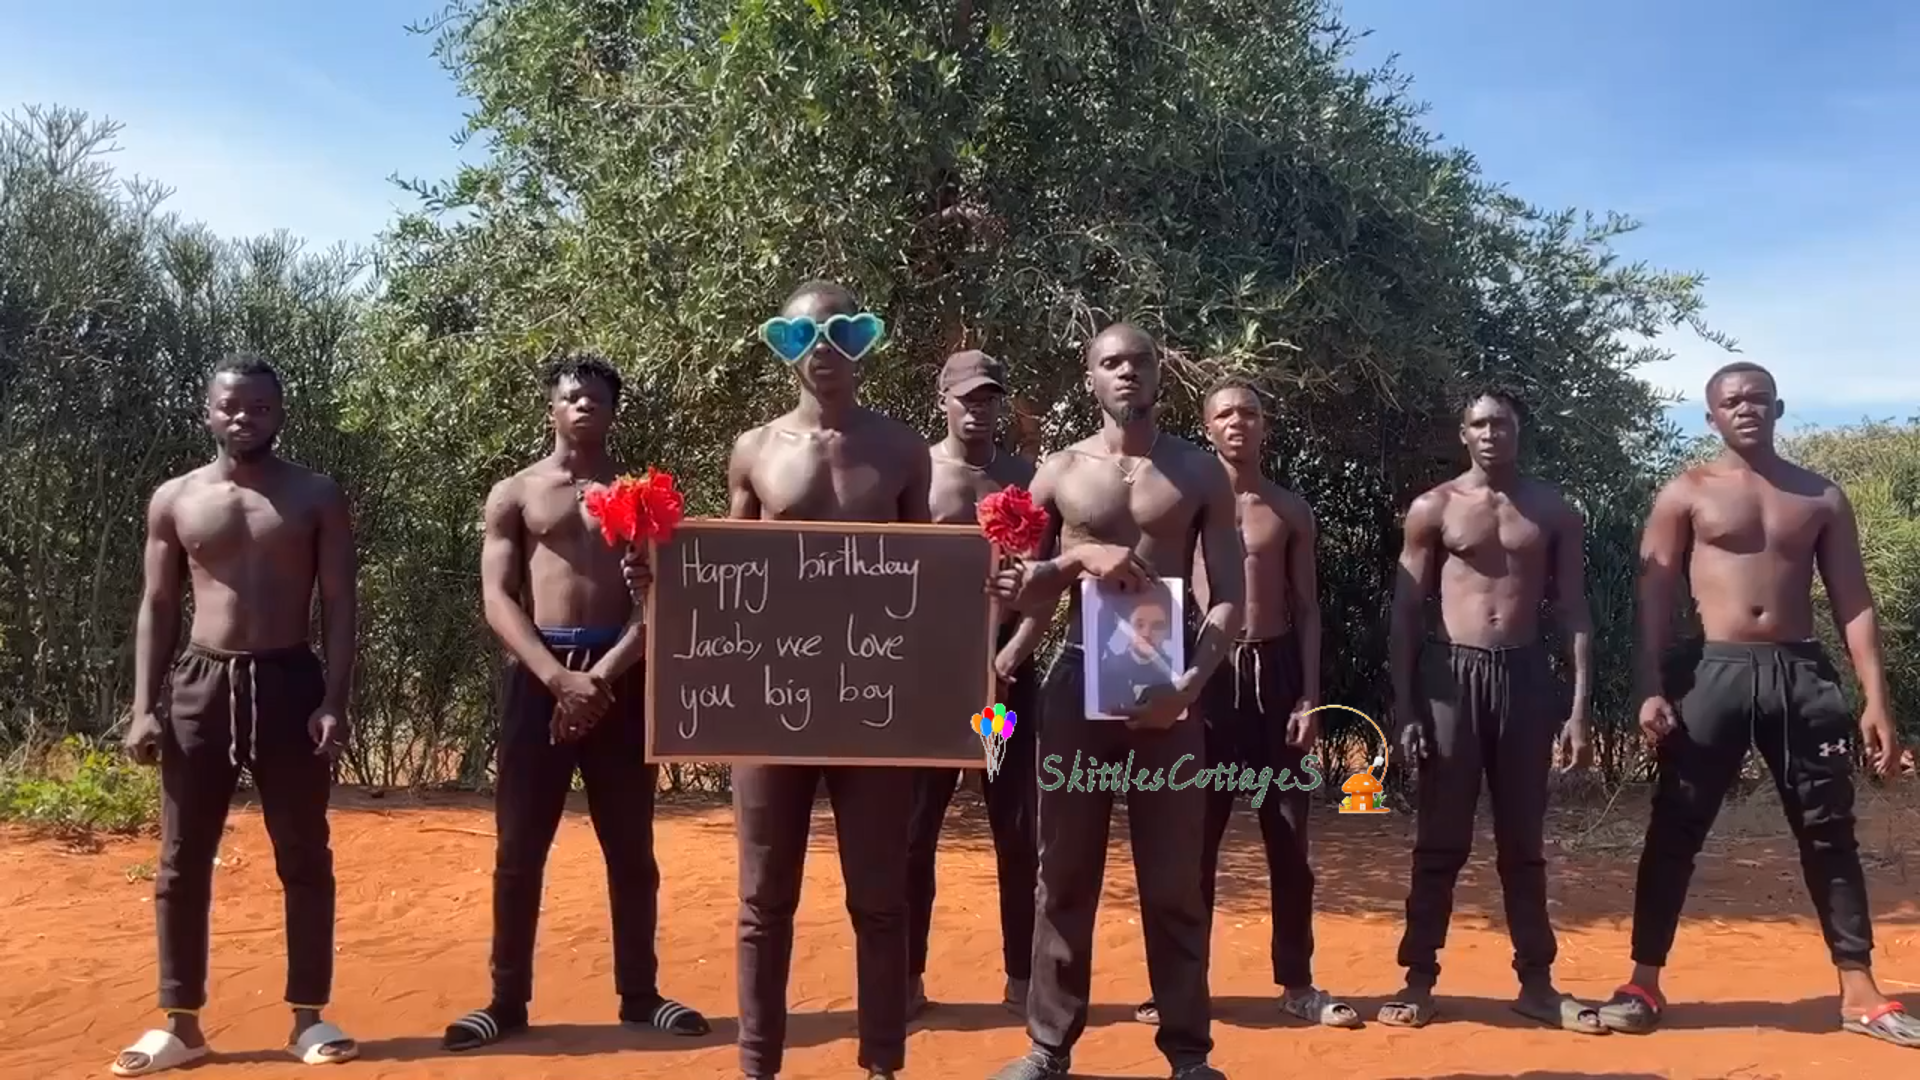 Greetings Video from Africa - Harmony Spirits - Skittles Cottage